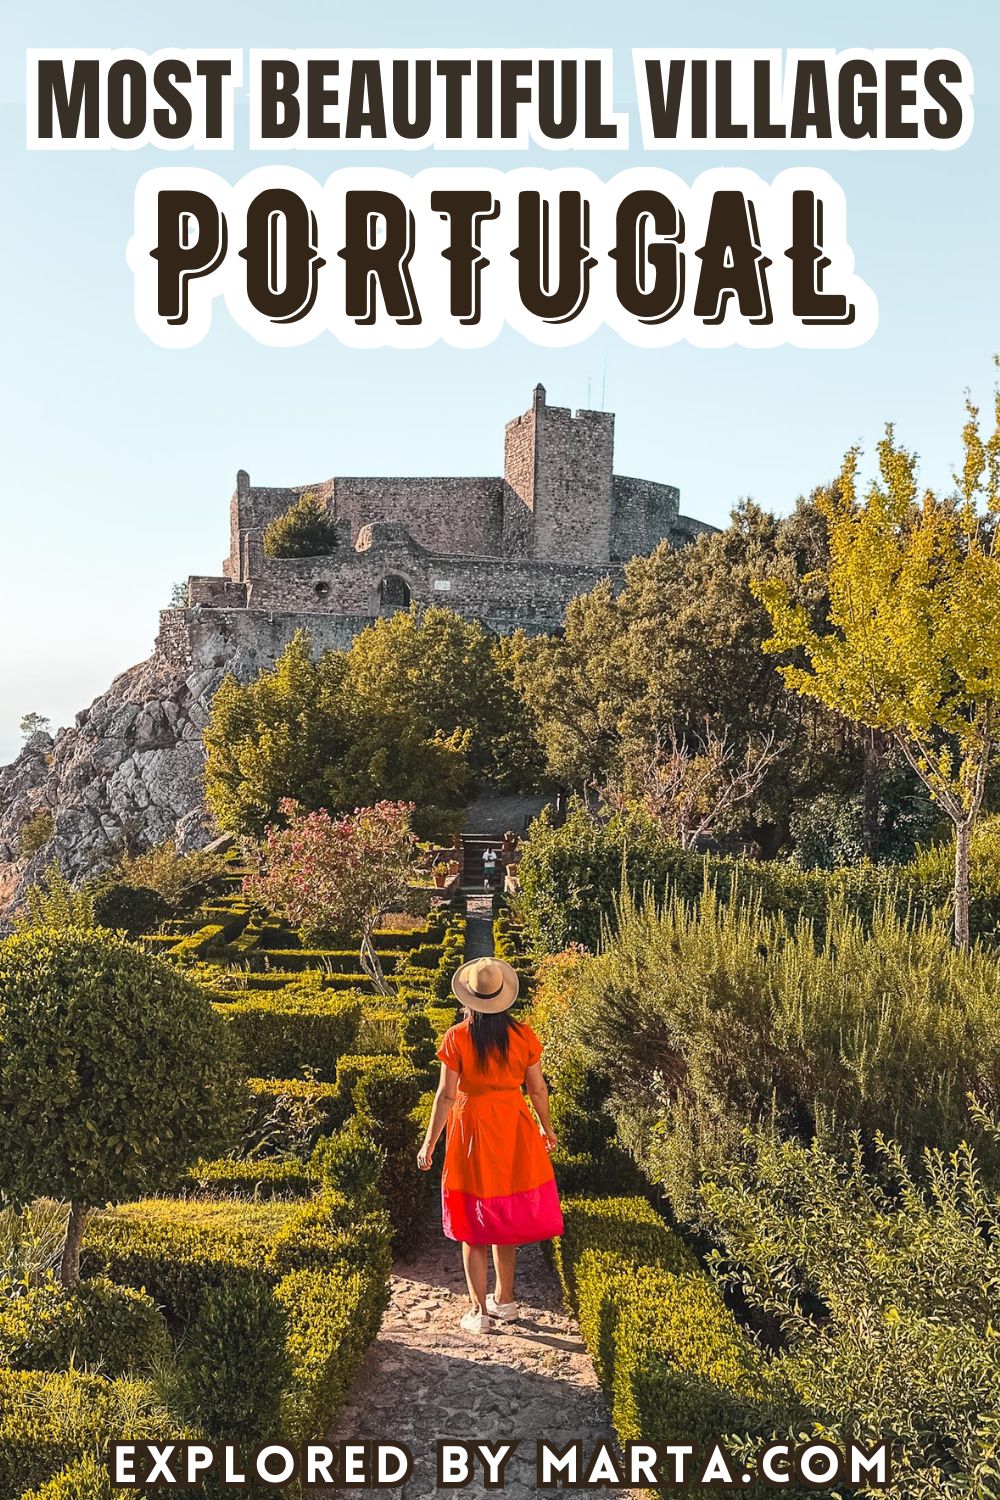 The most beautiful villages and small towns in Portugal